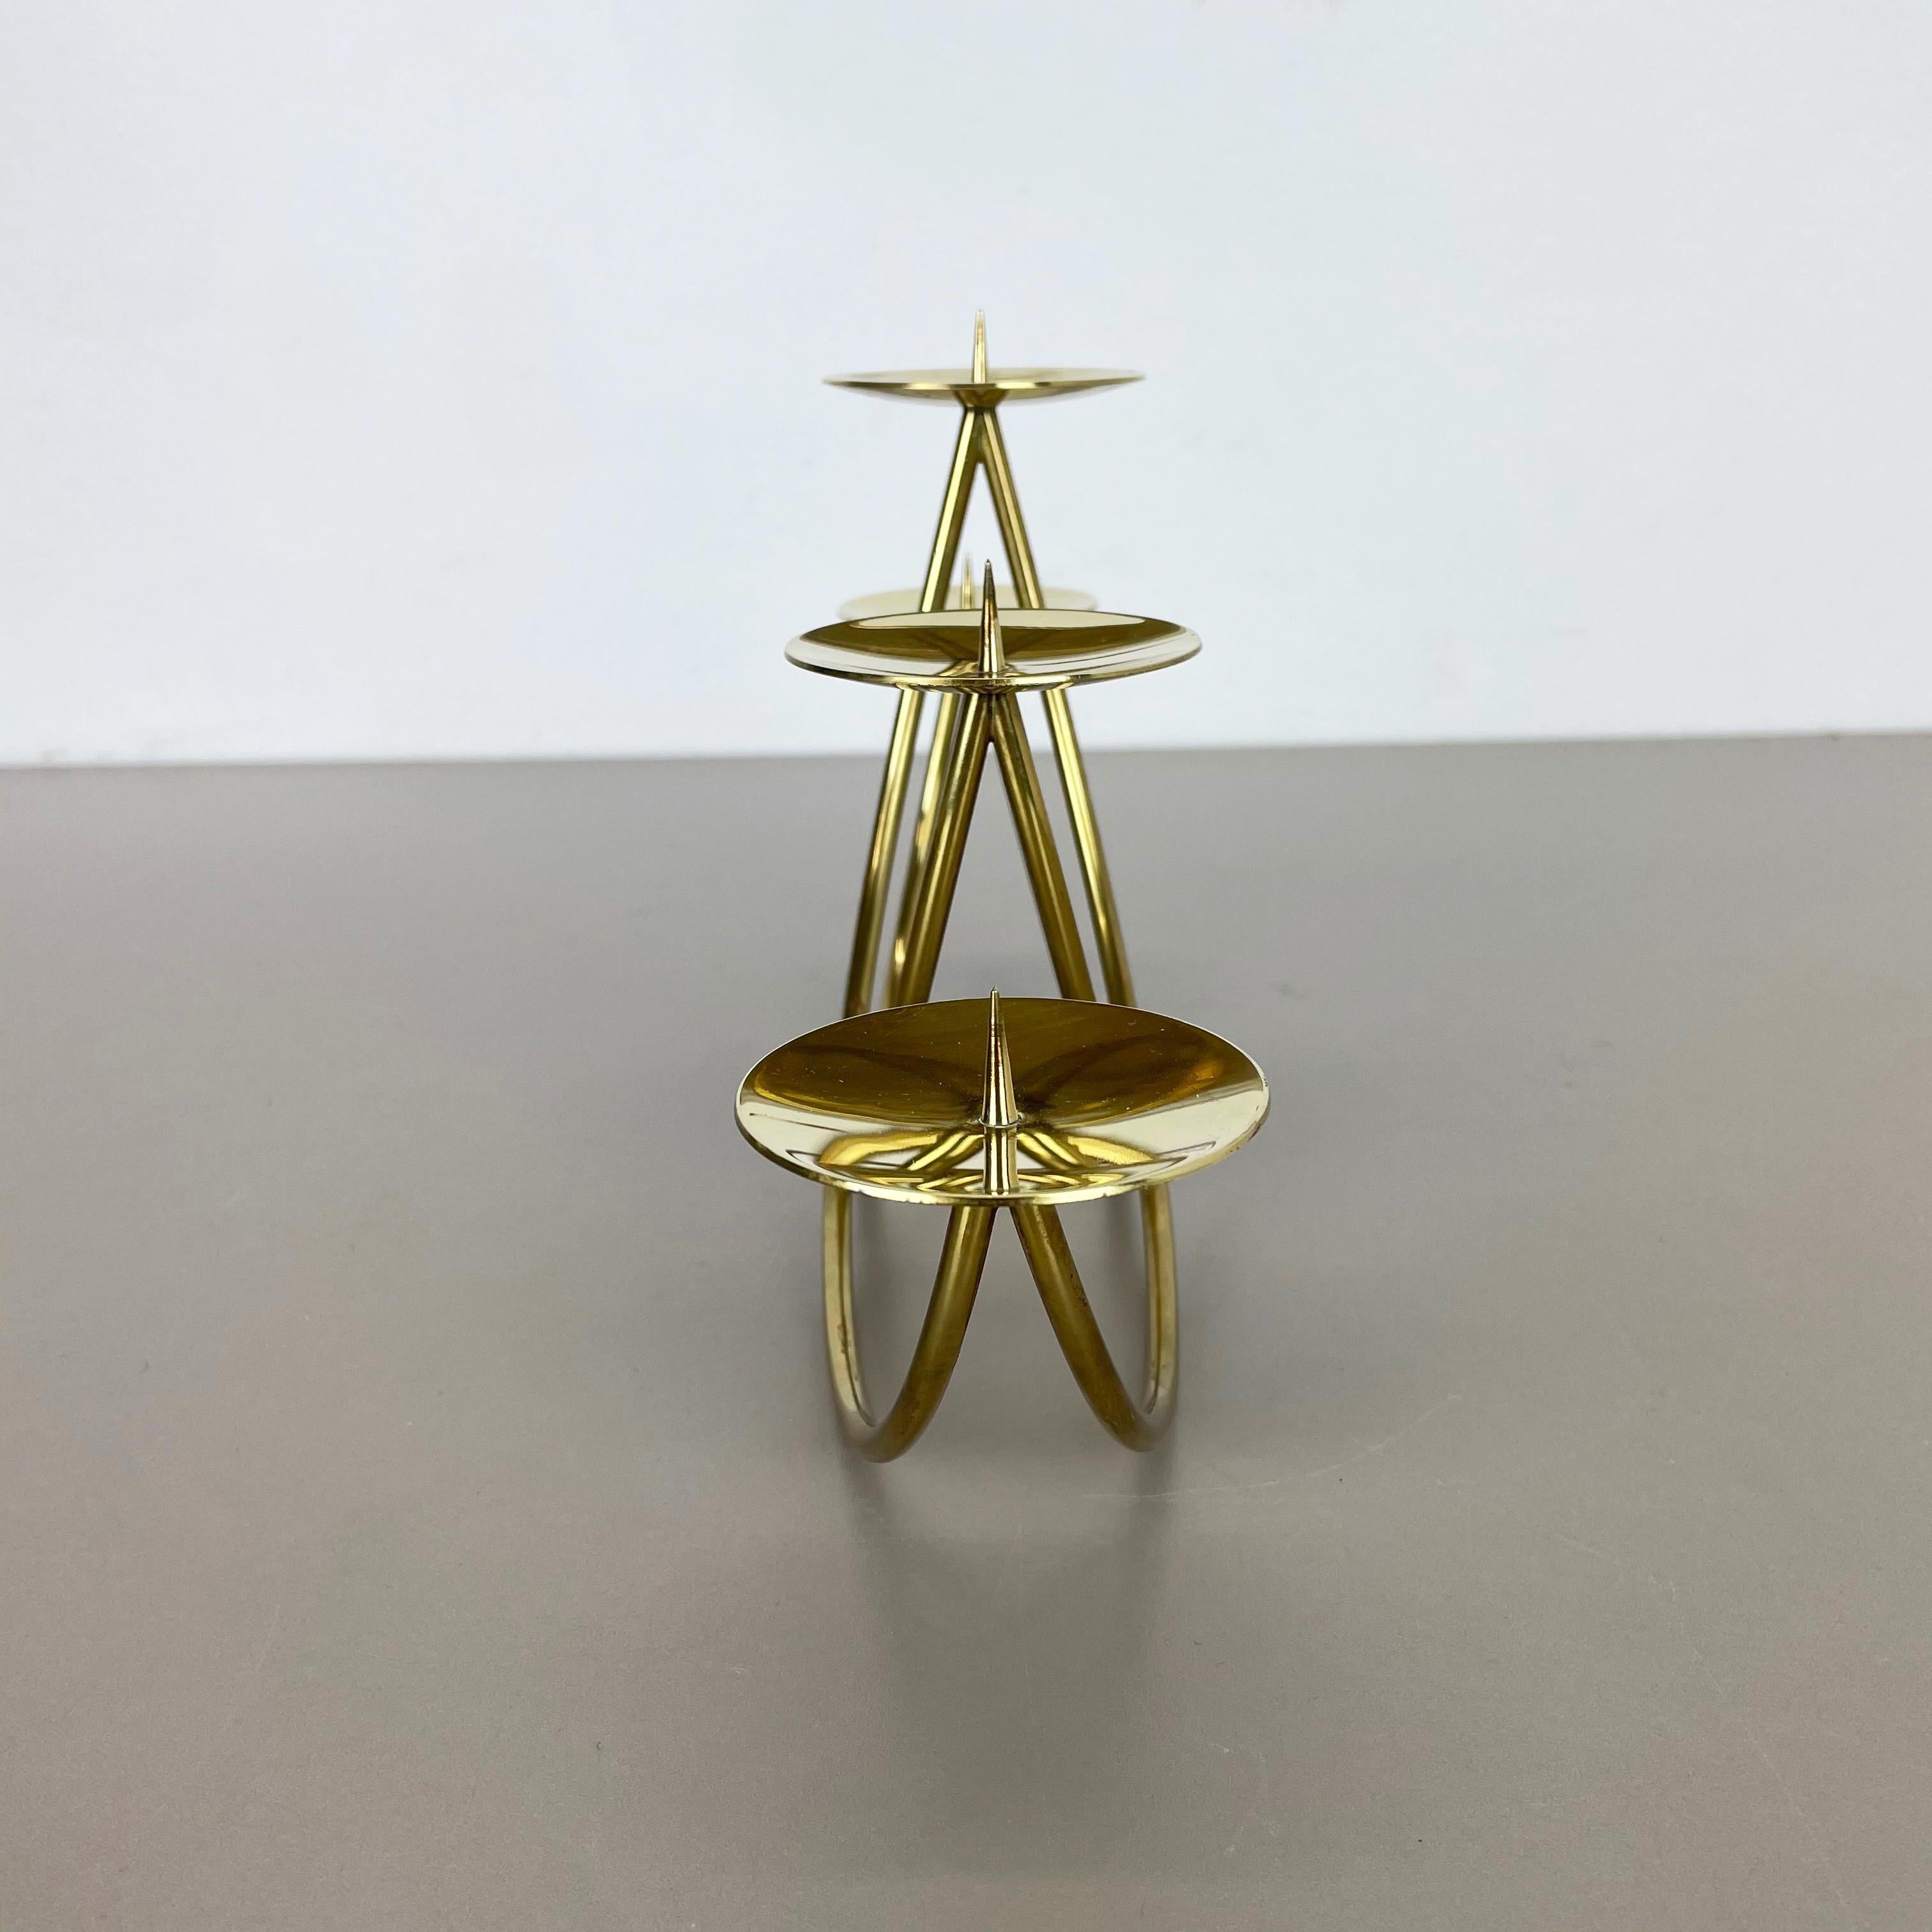 Sculptural Solid Brass Candleholder by Harald Buchrucker Bauhaus, Germany, 1950s For Sale 6